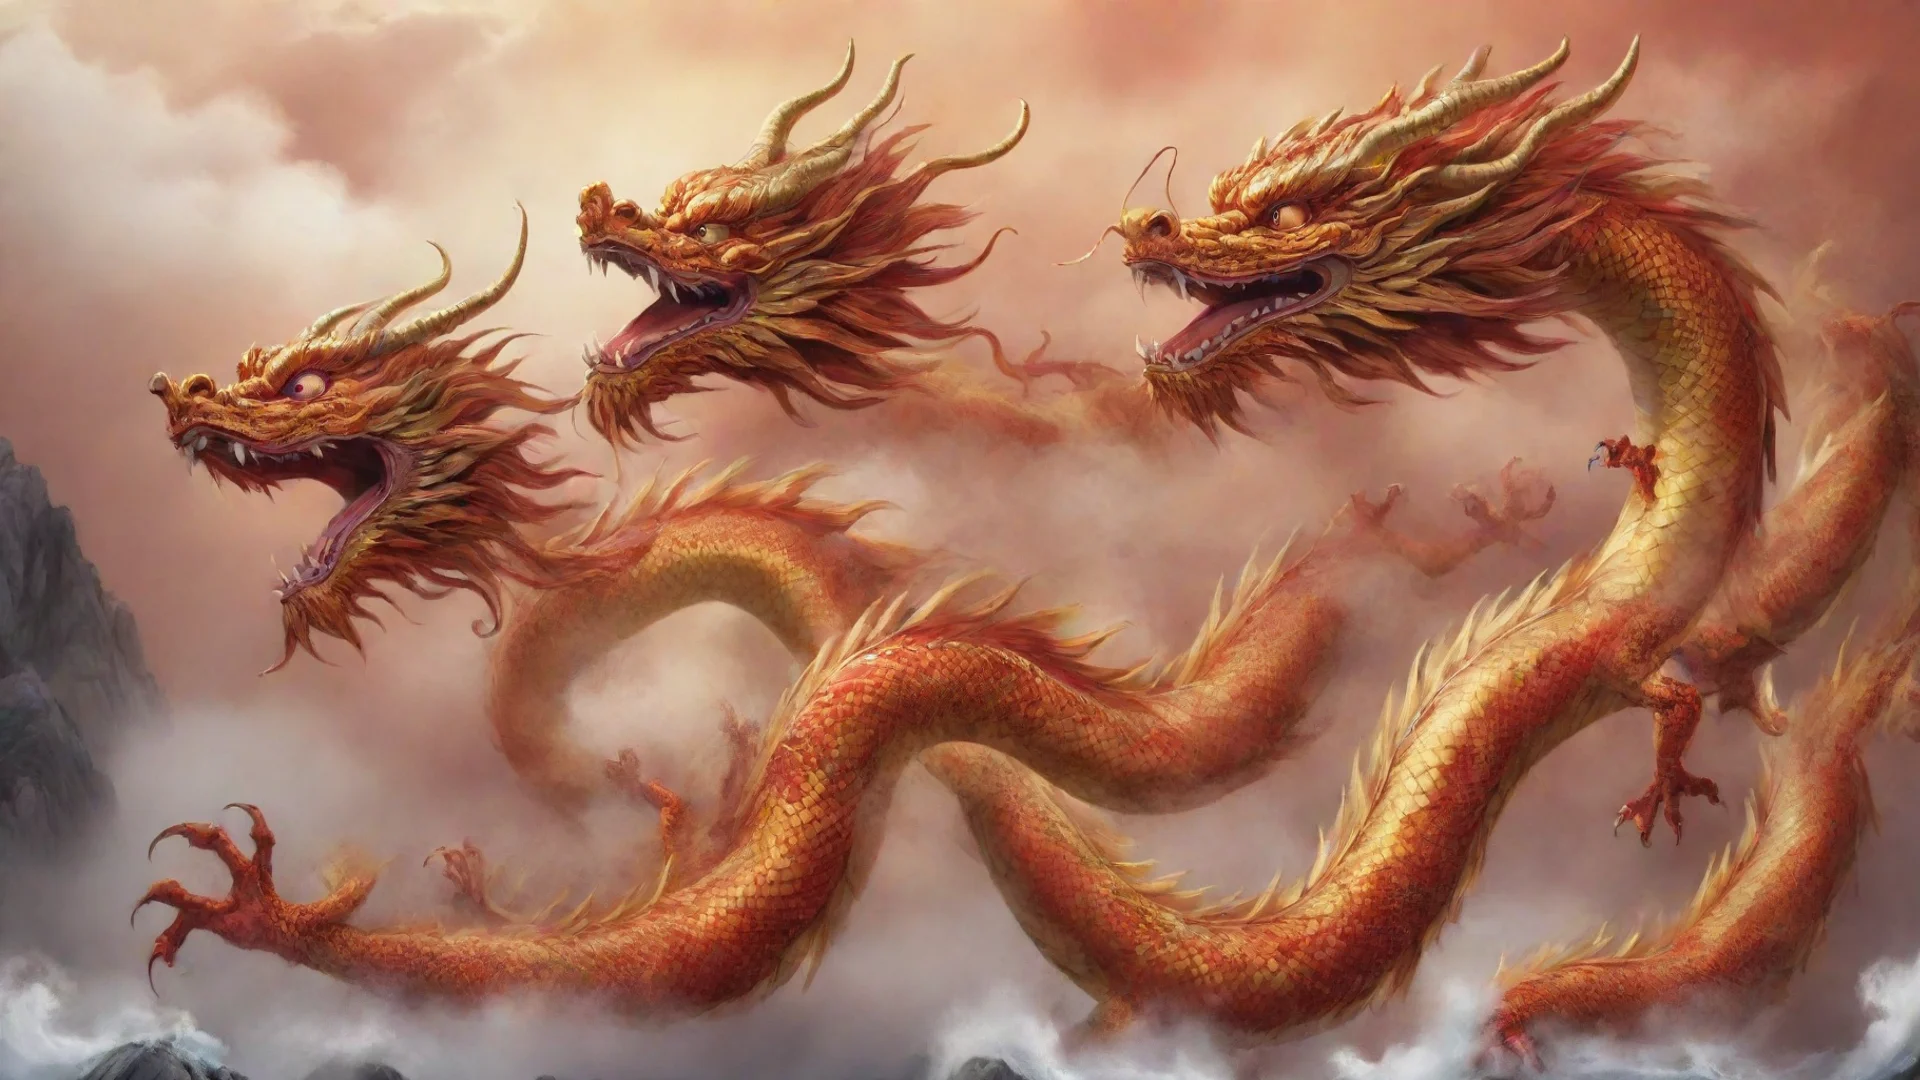 aiamazing chinese dragon awesome portrait 2 wide